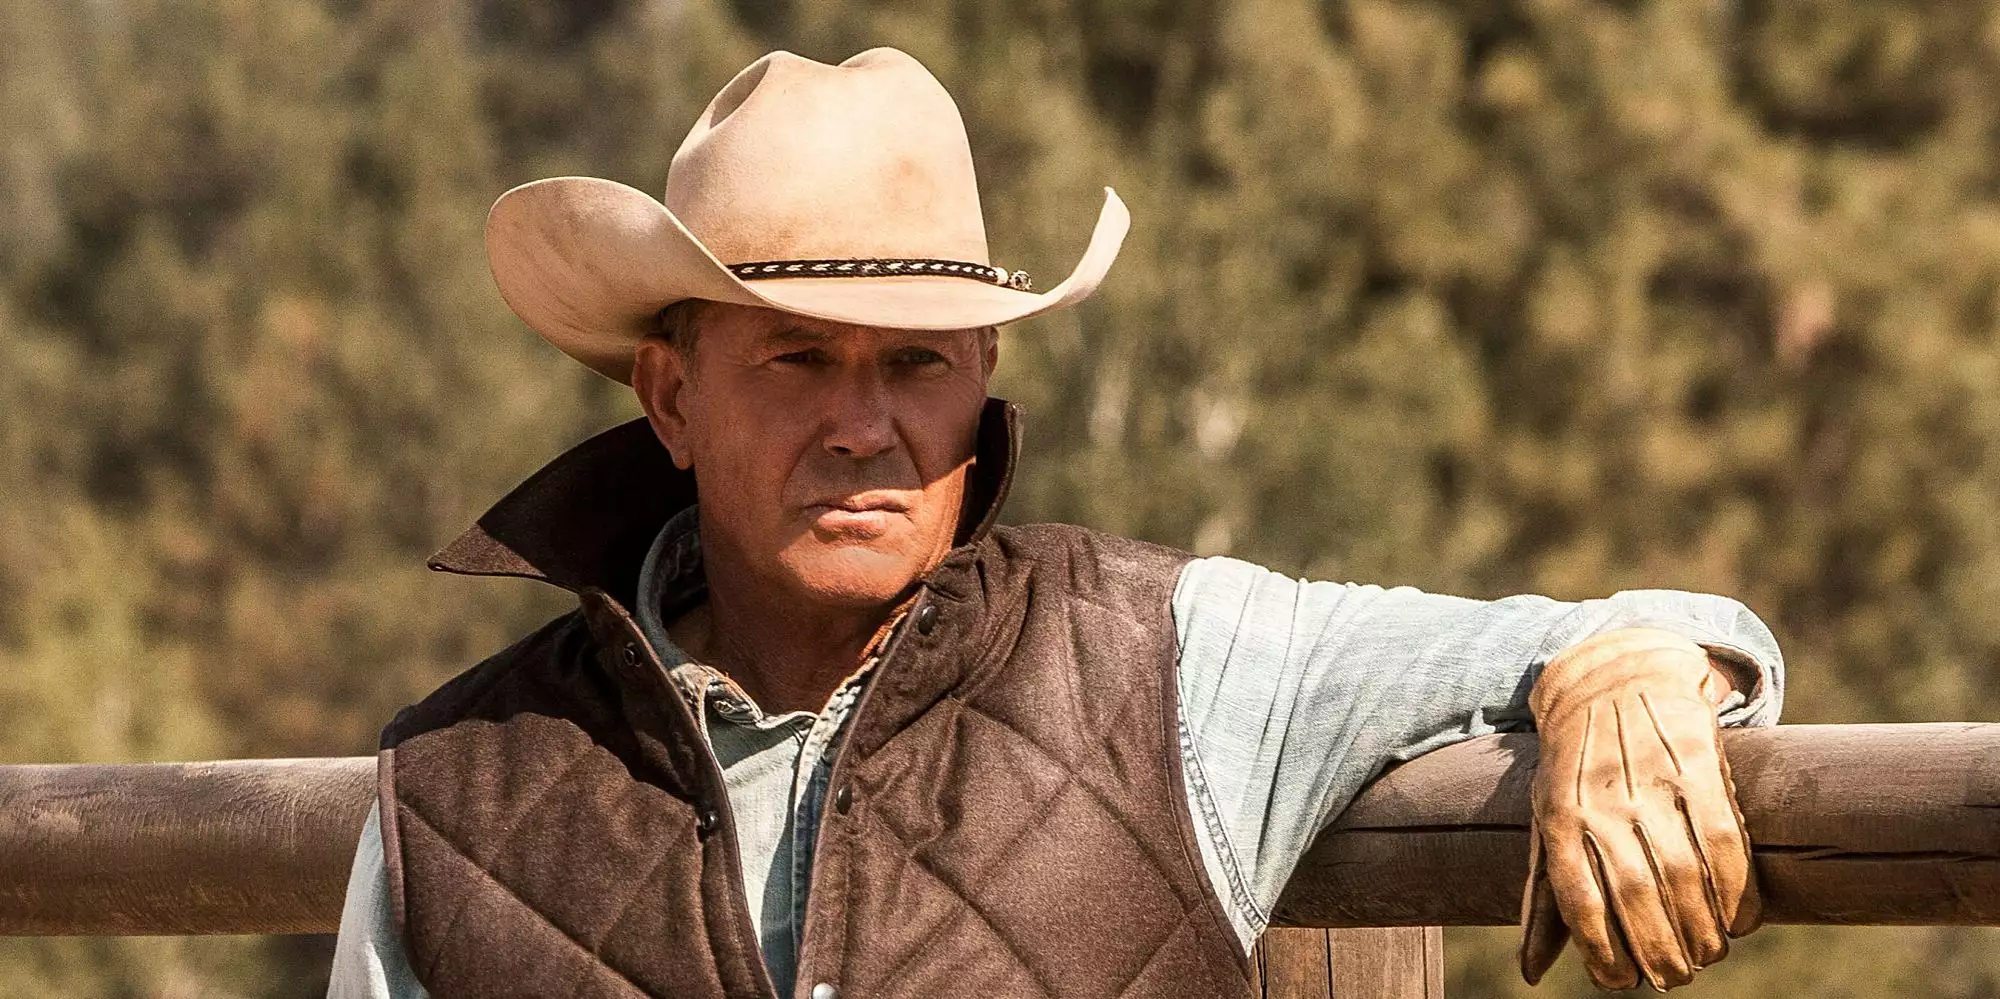 Yellowstone Season 1: The Epic Western Drama Unveiled – Family Feuds, Untamed Frontiers, and More!